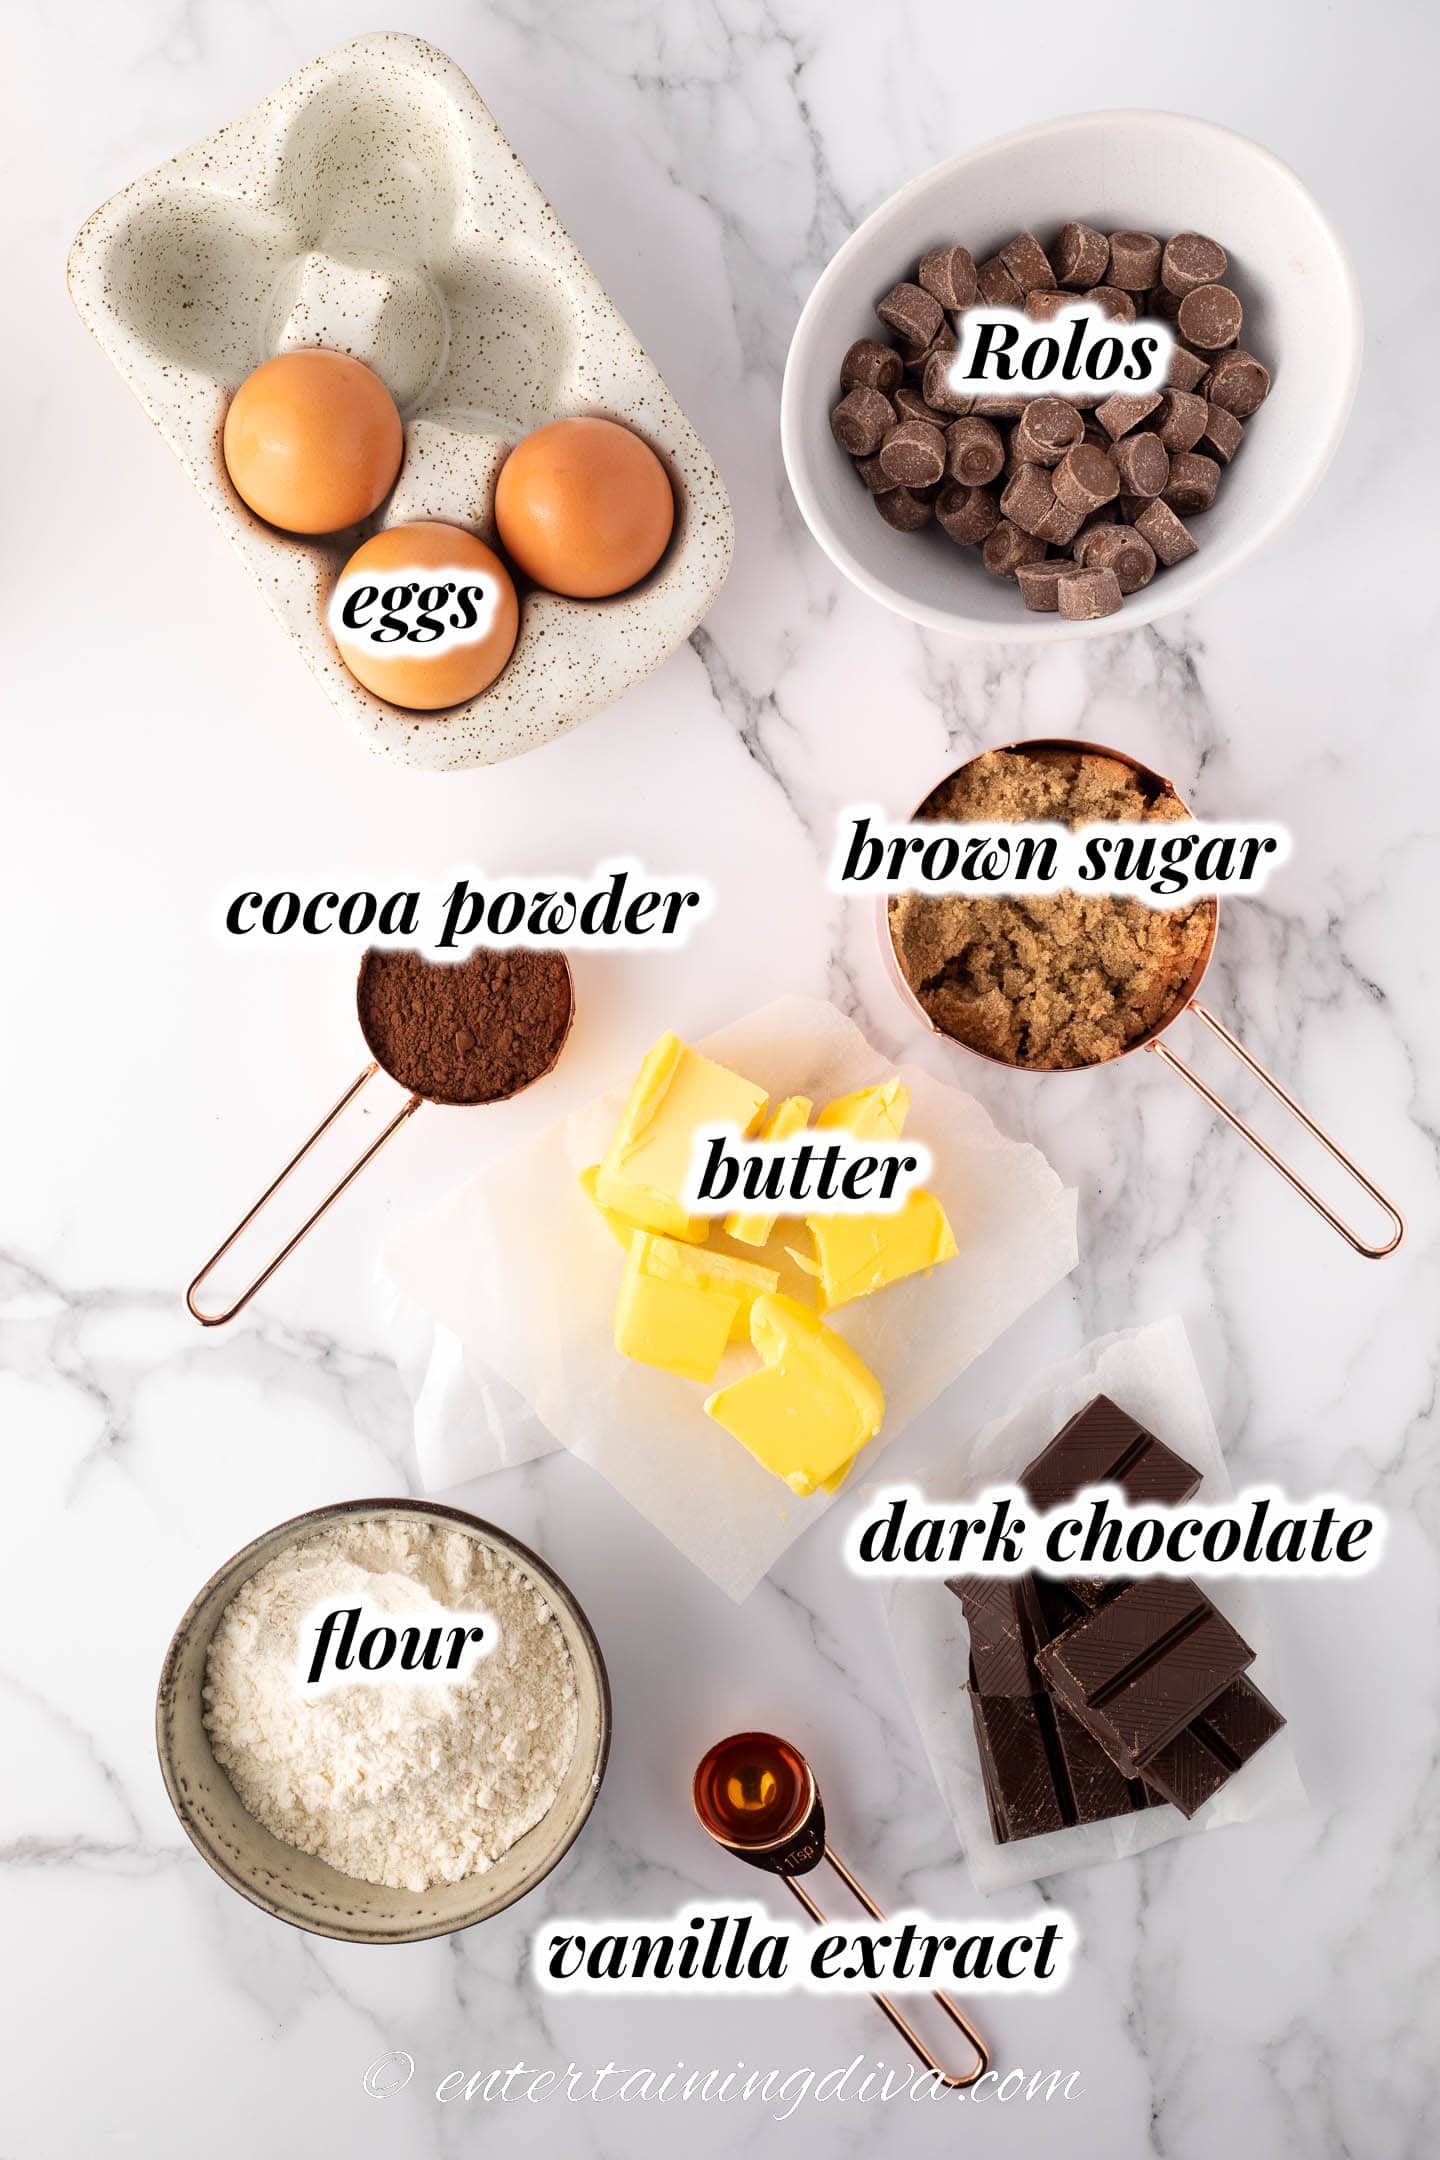 Rolo brownie ingredients - eggs, Rolos, cocoa powder, brown sugar, butter, flour, vanilla extract, dark chocolate